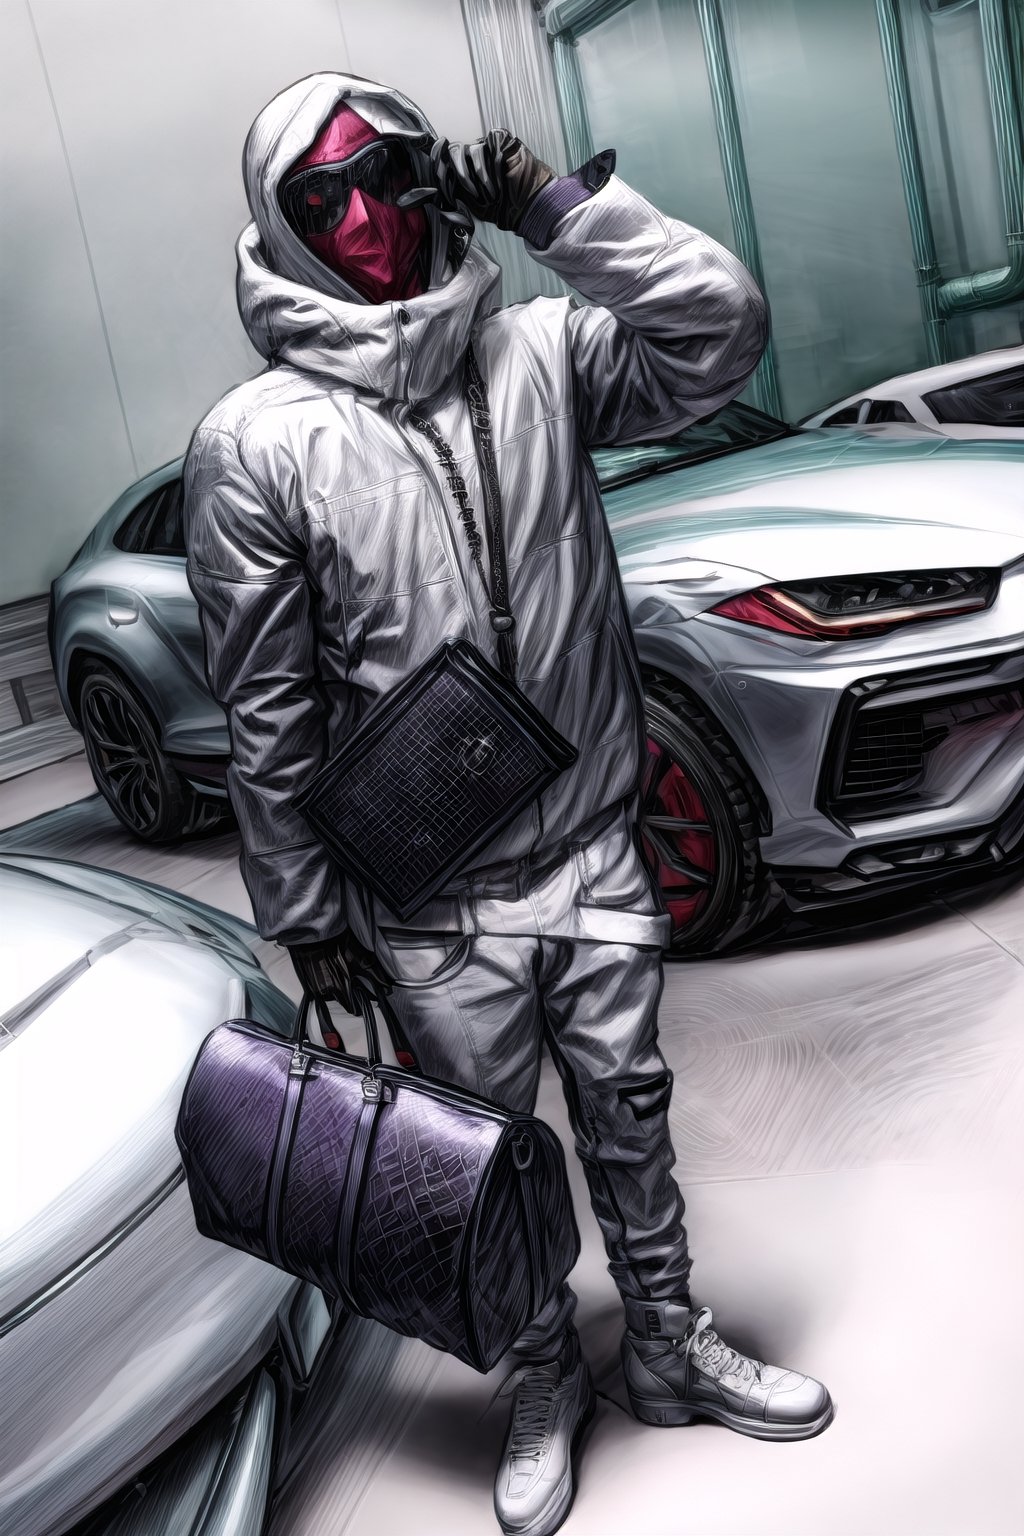 Masterpiece,Clean face,perfecteyes,No face, White and purple Outfit,Mafia, Gangster,Dollars,Green money,High detailed ,Sport car,